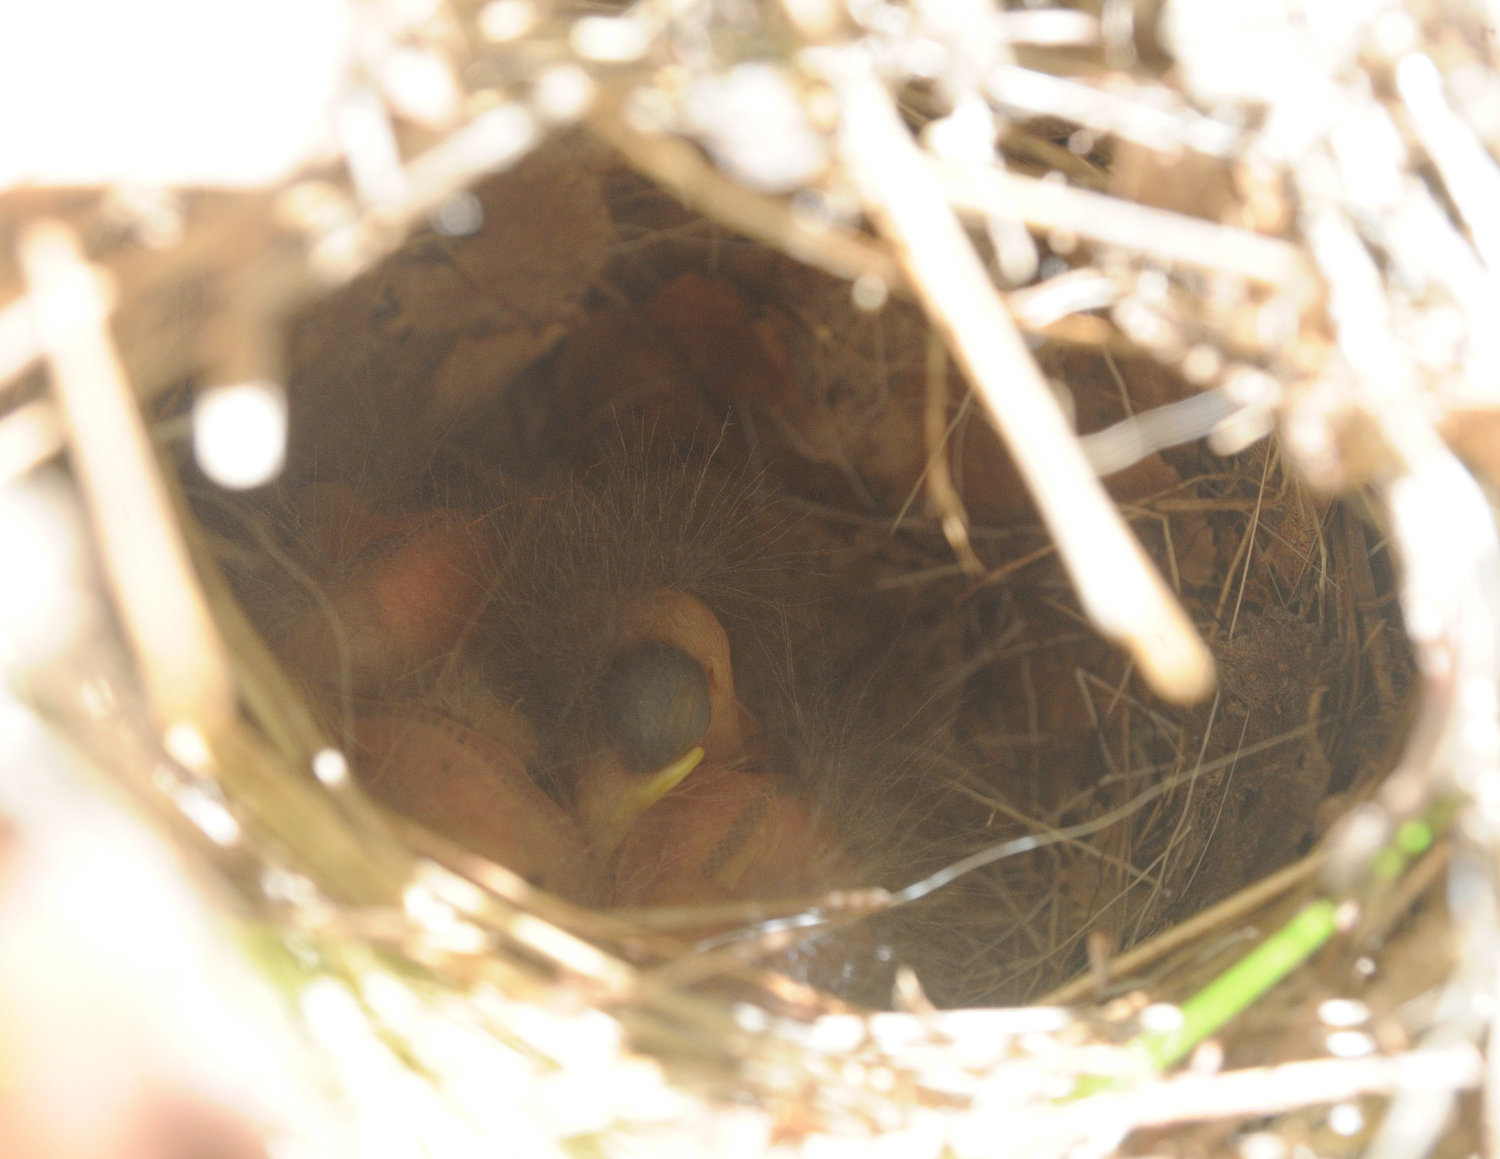 There is at least two ovenbird young in this nest; the bird in the center has its mouth open. The nest was on the ground in a grass-covered area; the adults shaped the grass to form a small enclosure with an entrance to the side. The nests usually end up looking like an outdoor bread oven, hence the ovenbird’s name.